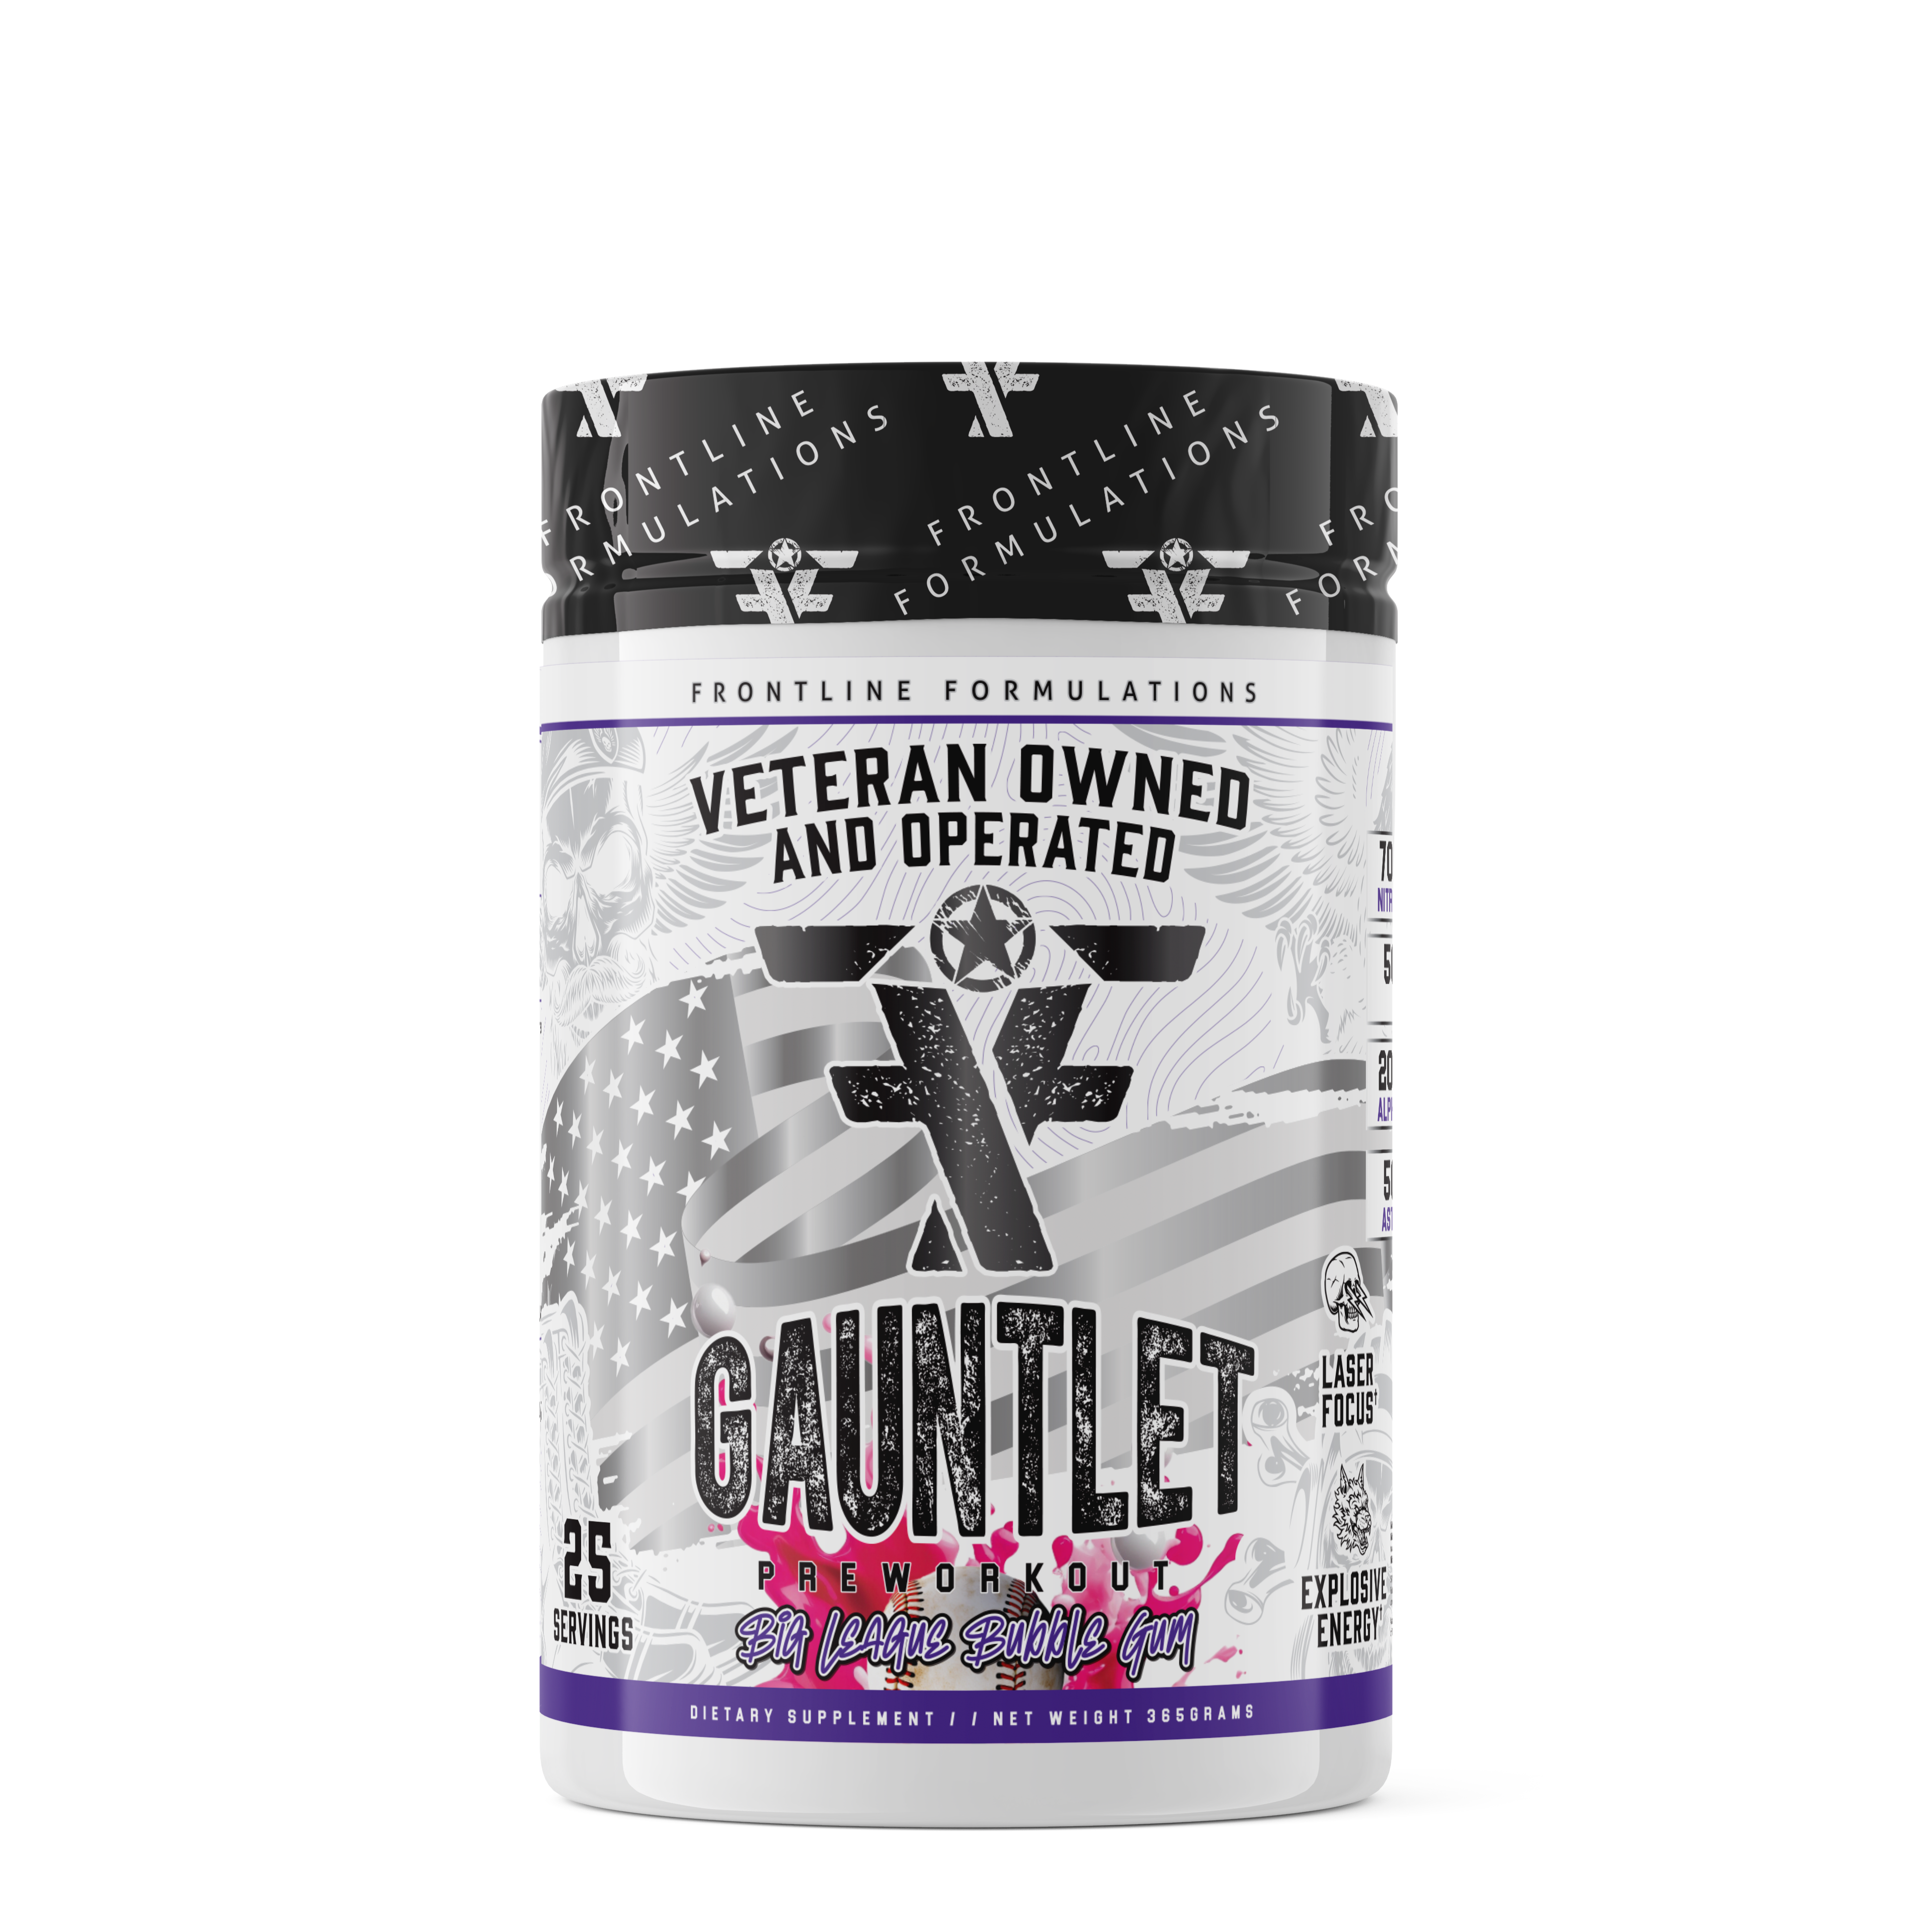 Gauntlet Pre-Workout Gauntlet is quickly becoming one of the most sought-after mid-stim pres on the market! Boasting 275mg of caffeine combined with 50mg of astragin for almost instant absorption! 300mg of L-Theanine to prevent jitters and eliminate that